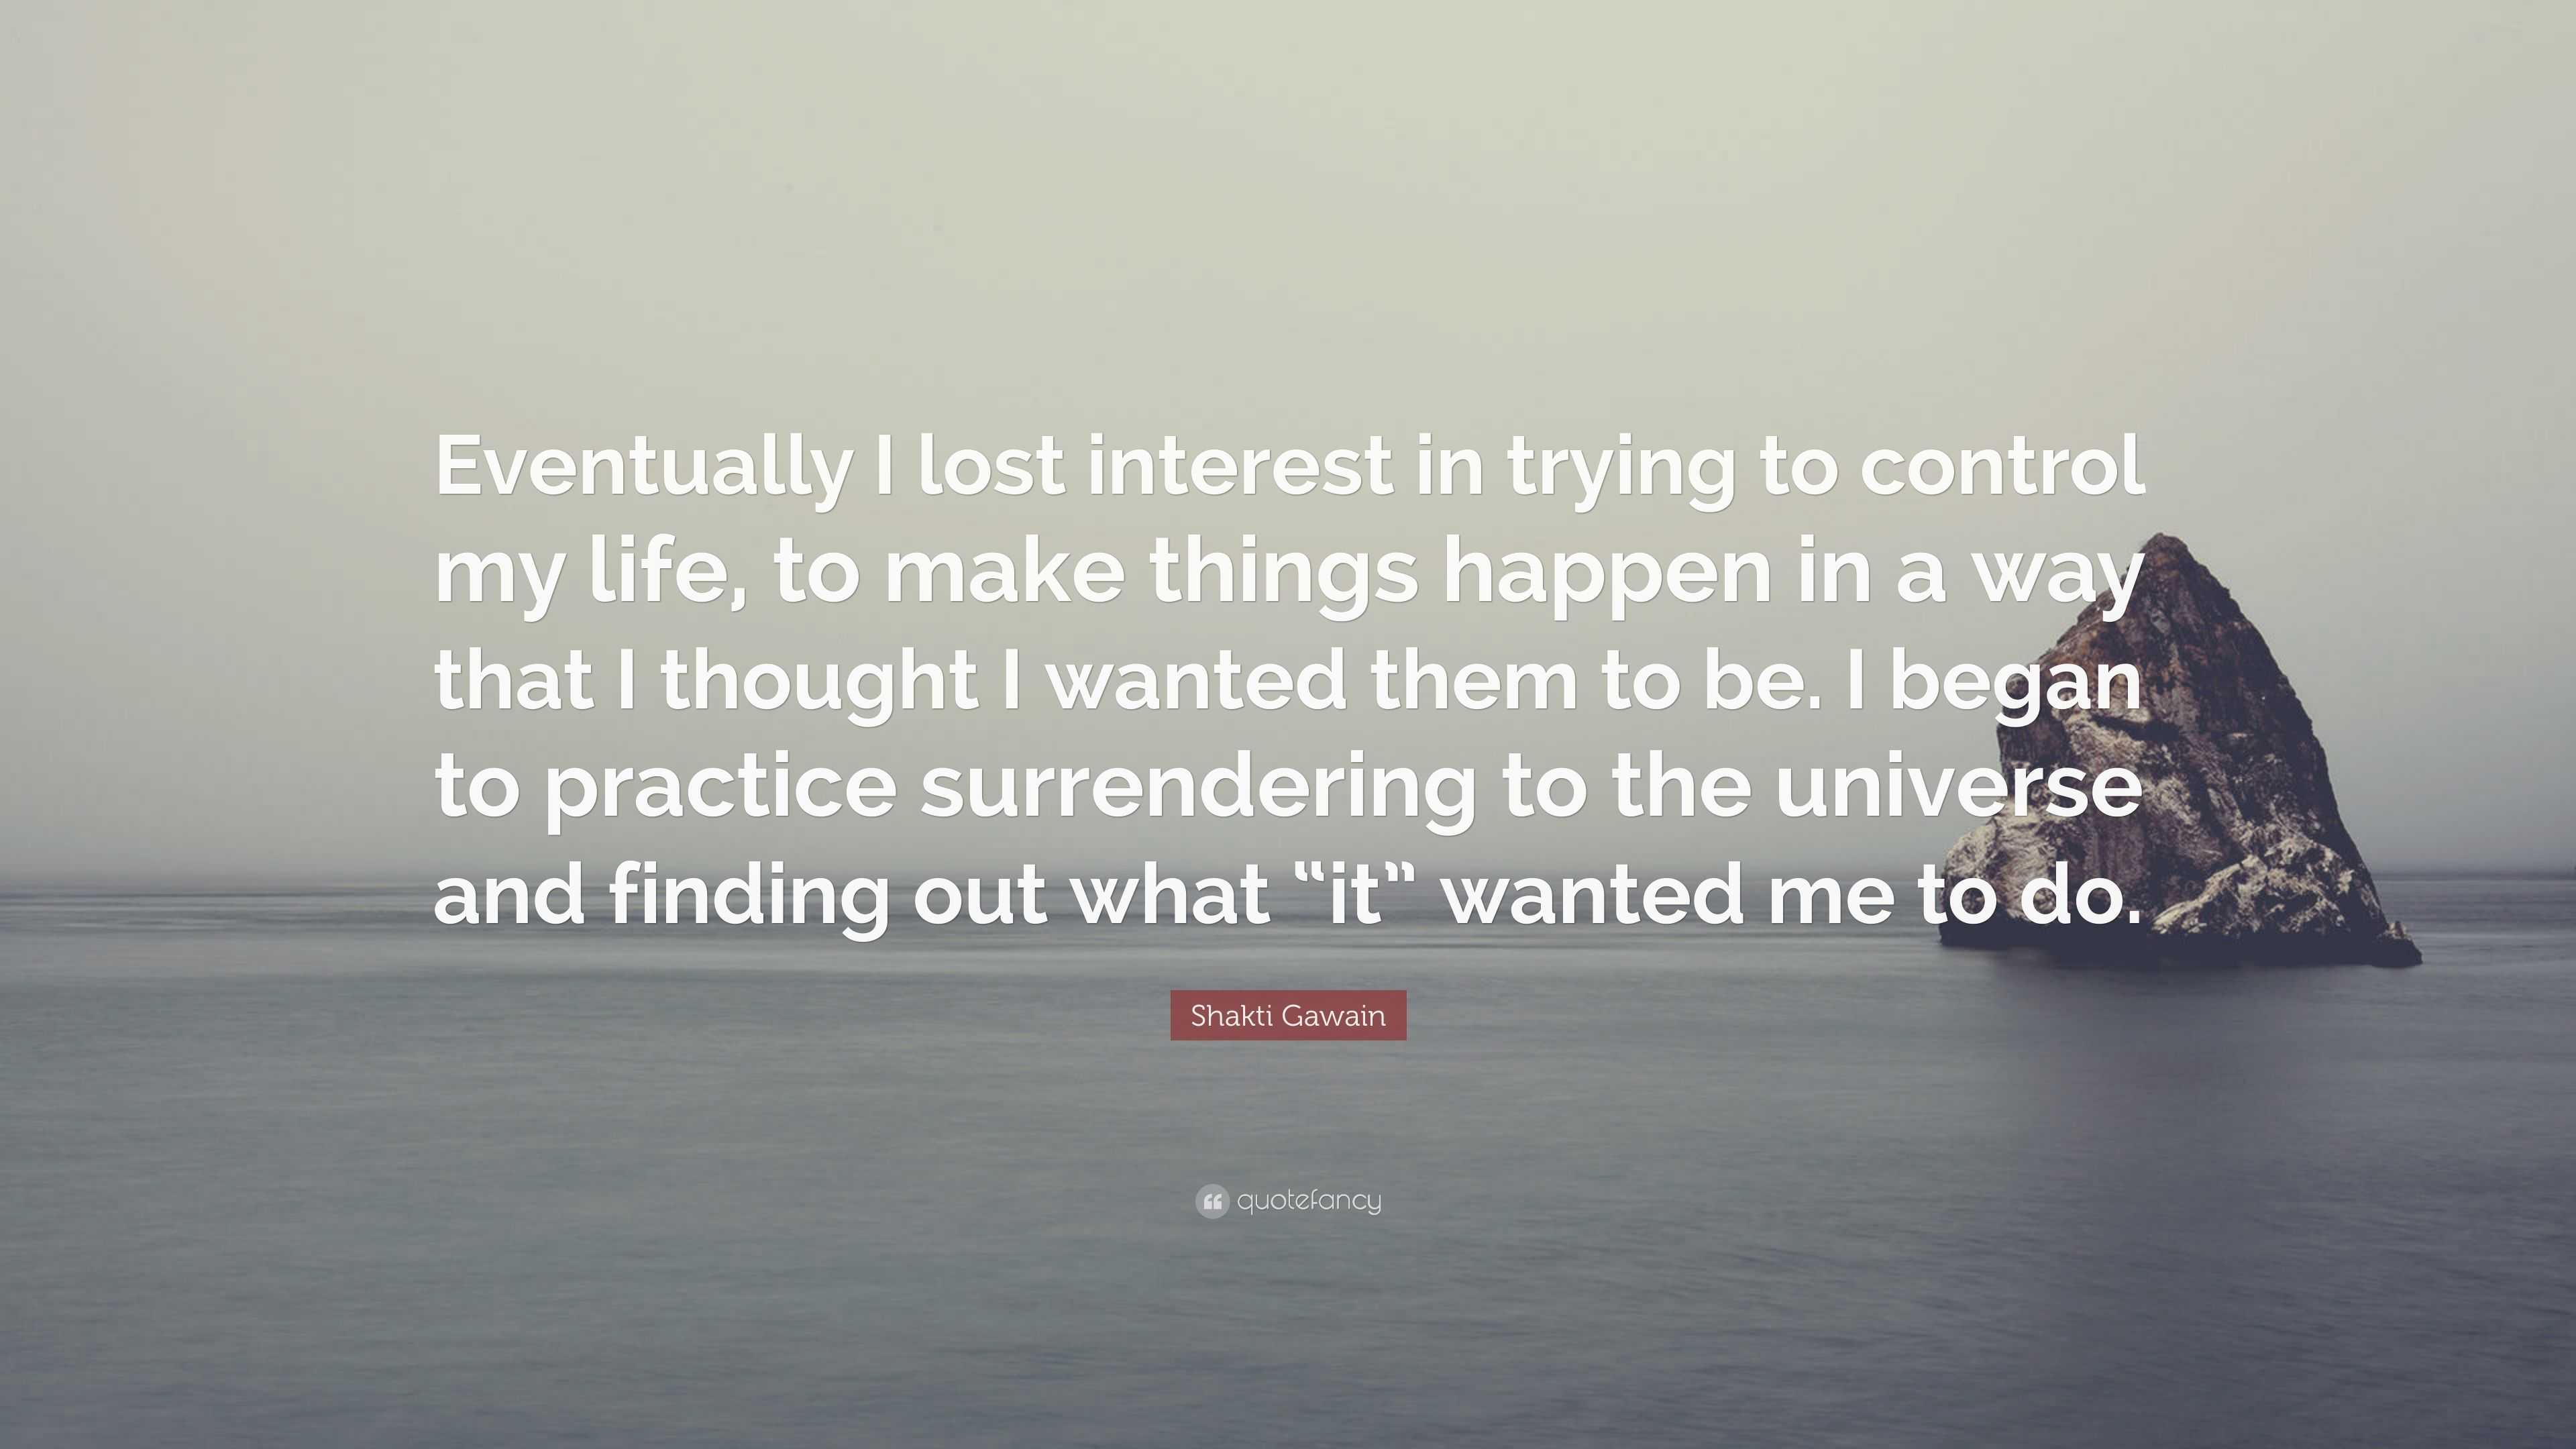 Shakti Gawain Quote: “Eventually I lost interest in trying to control ...